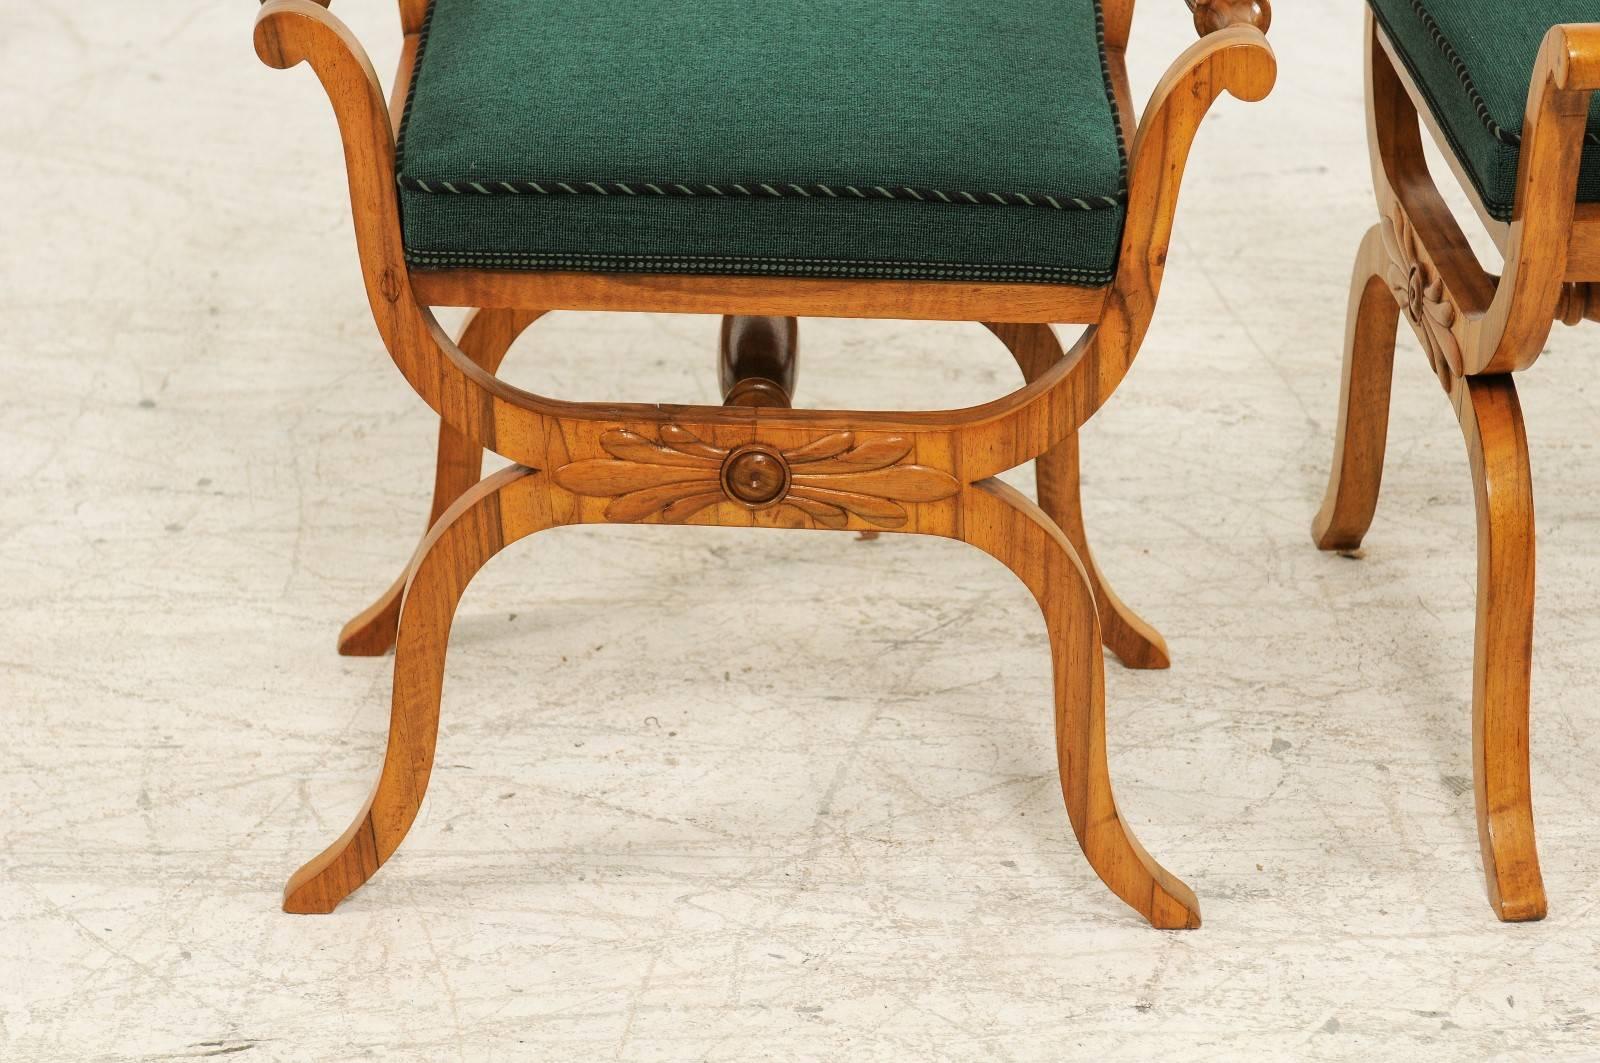 A pair of mid-19th century Austrian Biedermeier stools with green upholstered seats and X-form base. Each of this pair of Biedermeier stools features a new green upholstered rectangular seat, safely secured by two delicately out-scrolled arms with